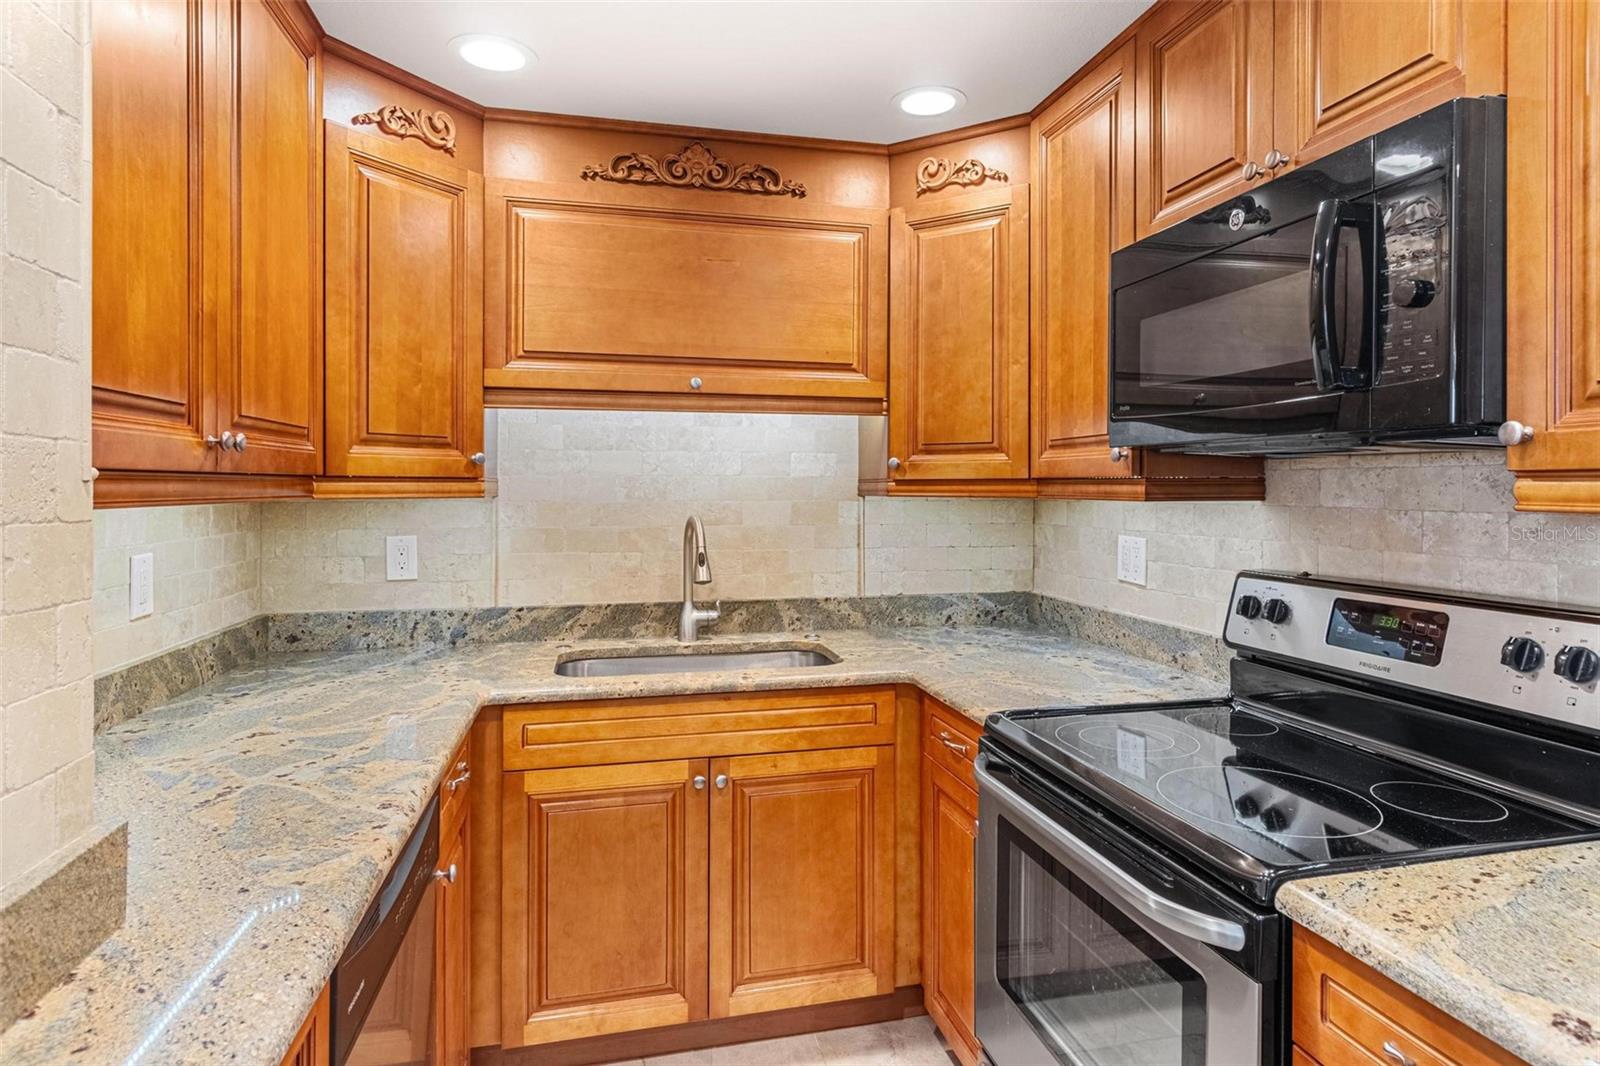 Gorgeous kitchen with wood cabinets, stainless appliances and granite counters.